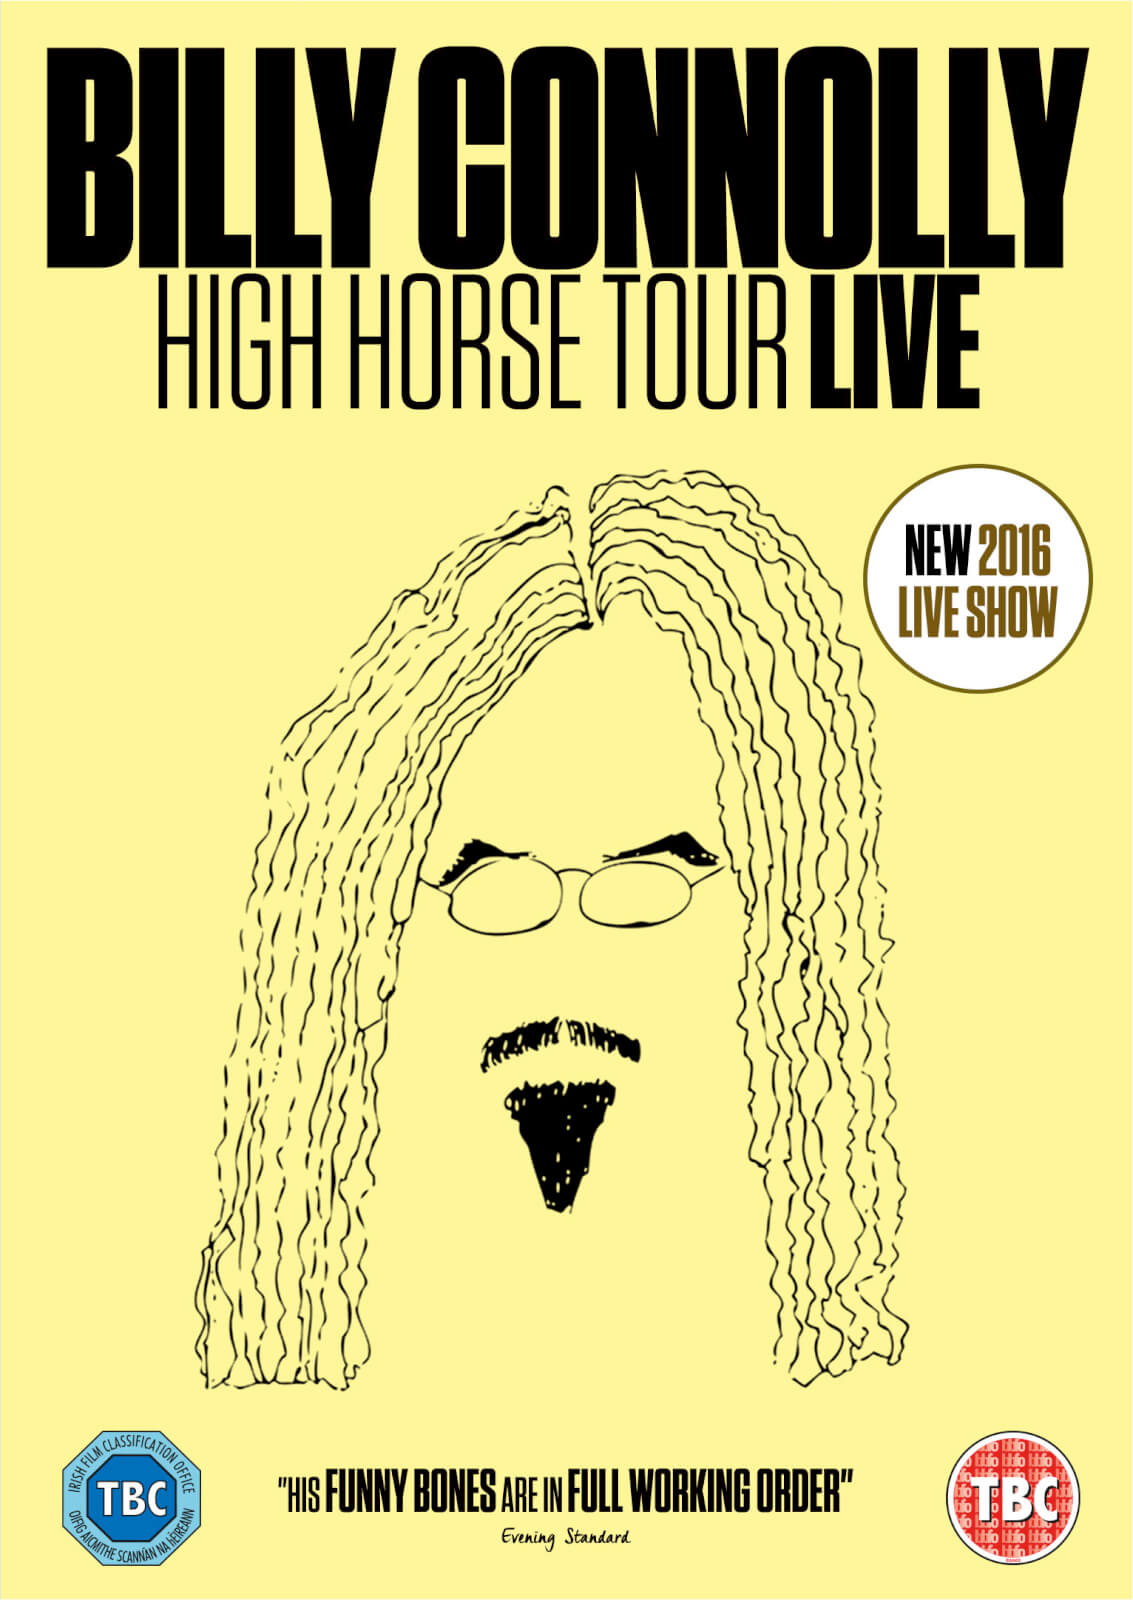 Billy Connolly Live 2016 High Horse Tour